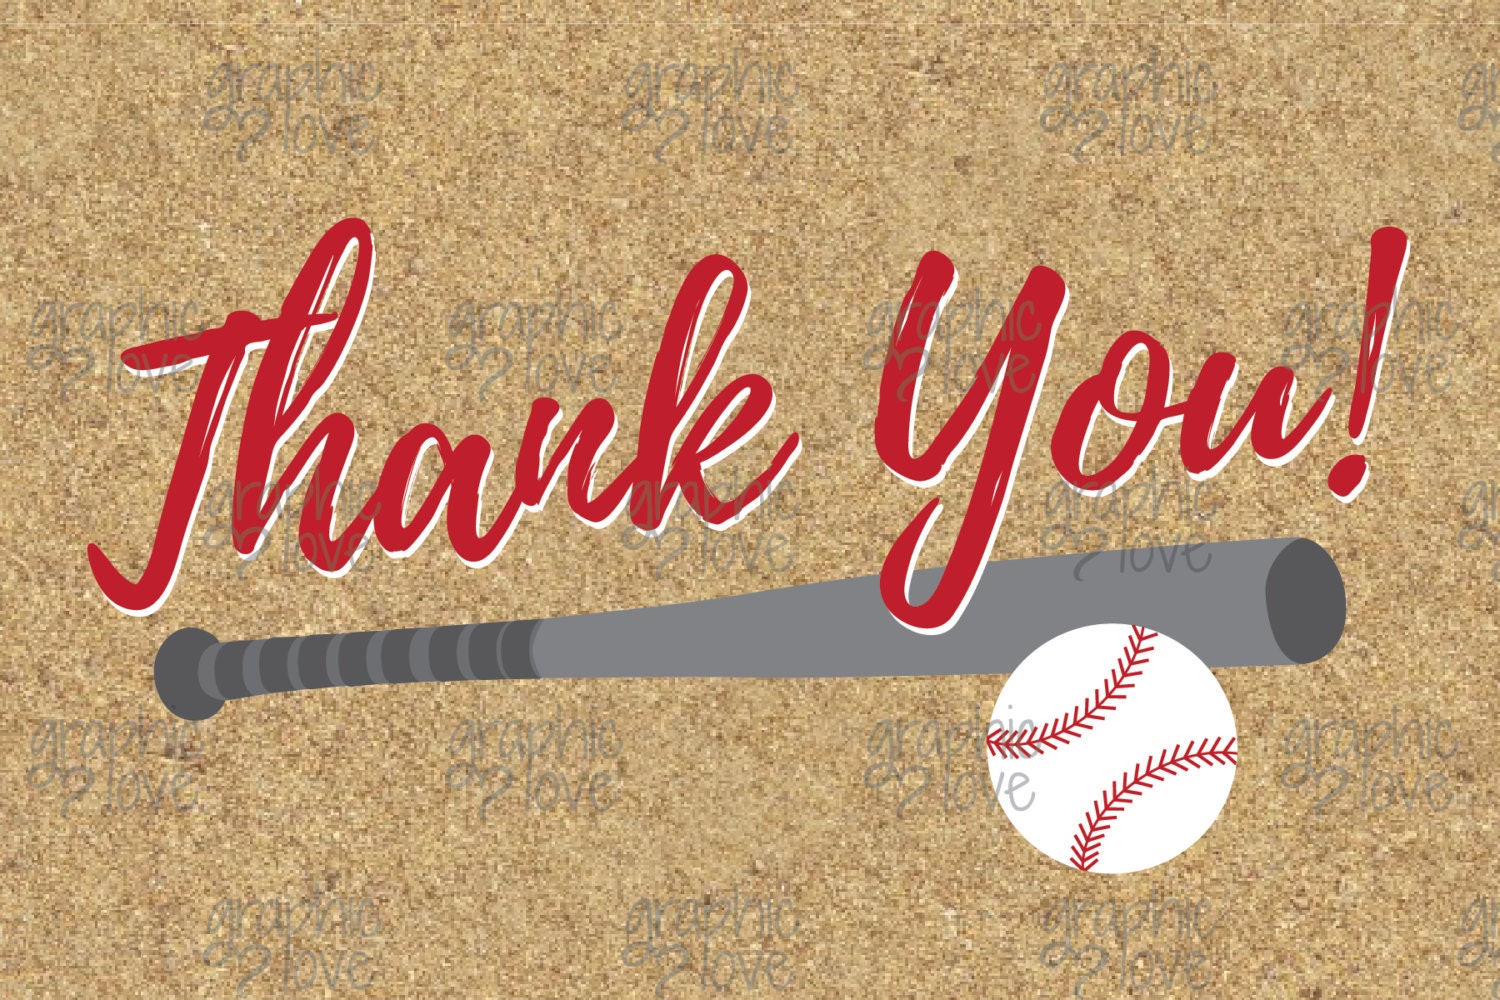 baseball-thank-you-cards-birthday-party-red-white-4x6-jpg